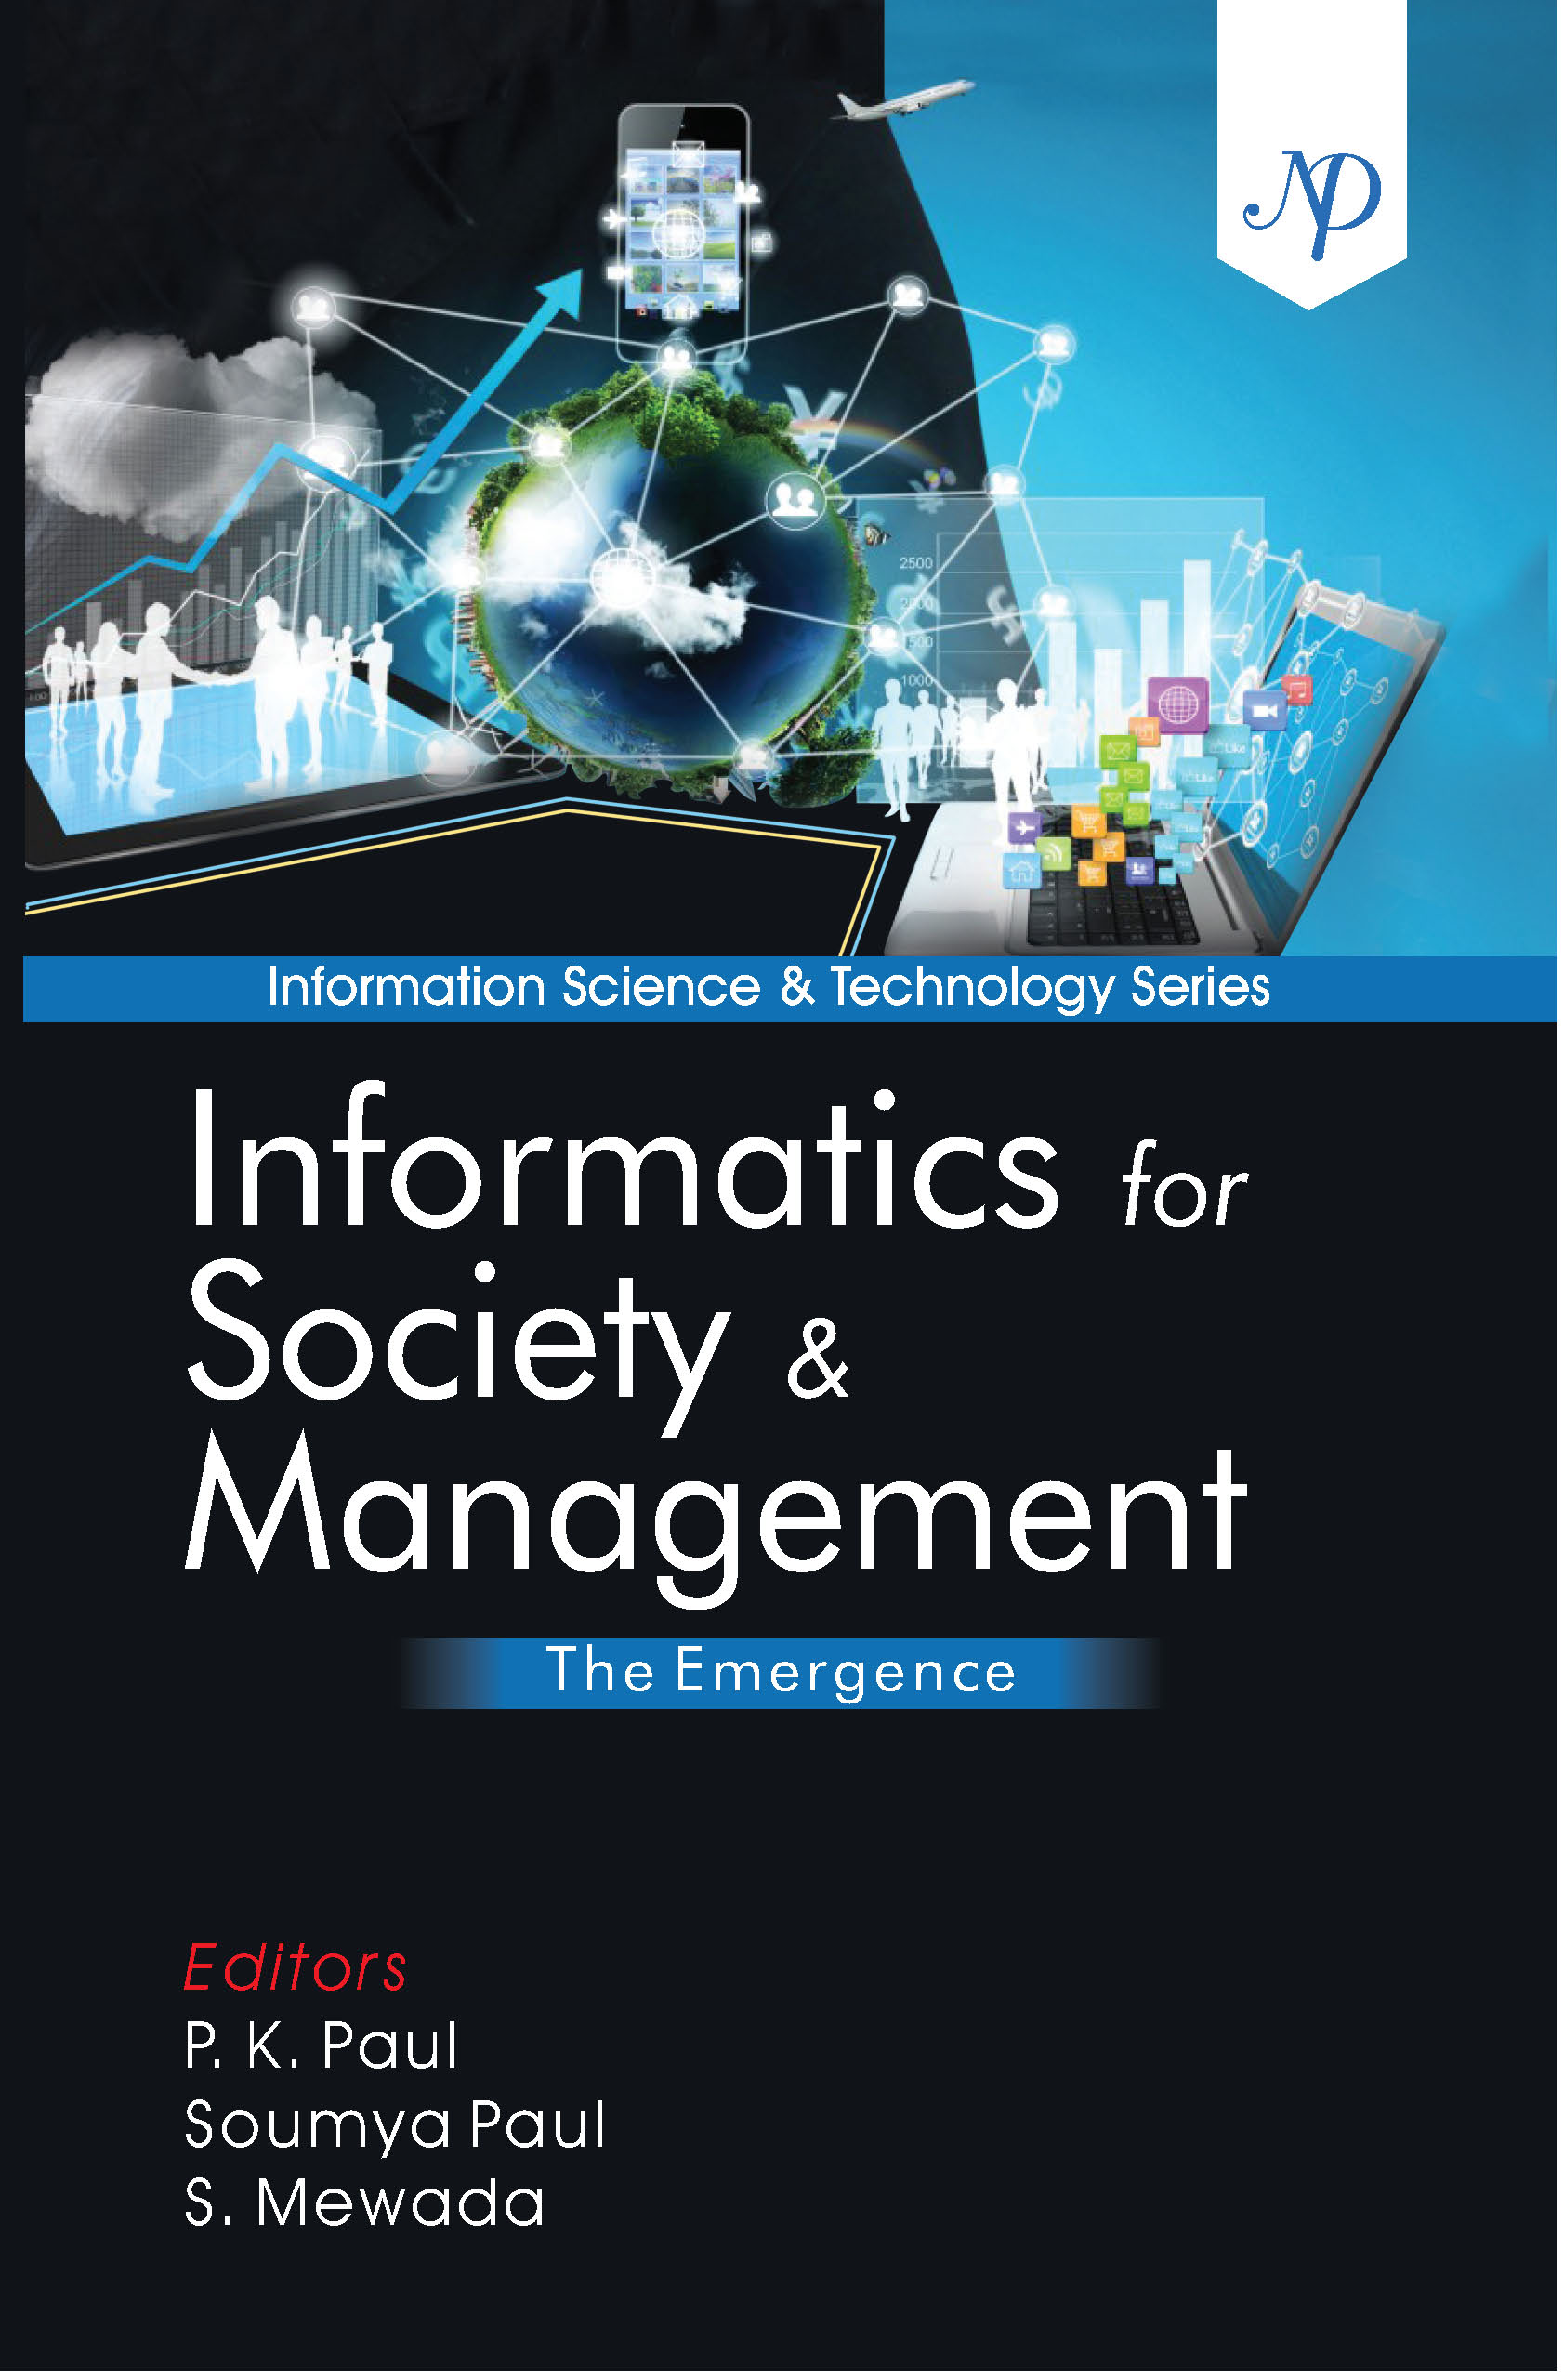 Informatics for Society & Management- The Emergence By PK Paul.jpg